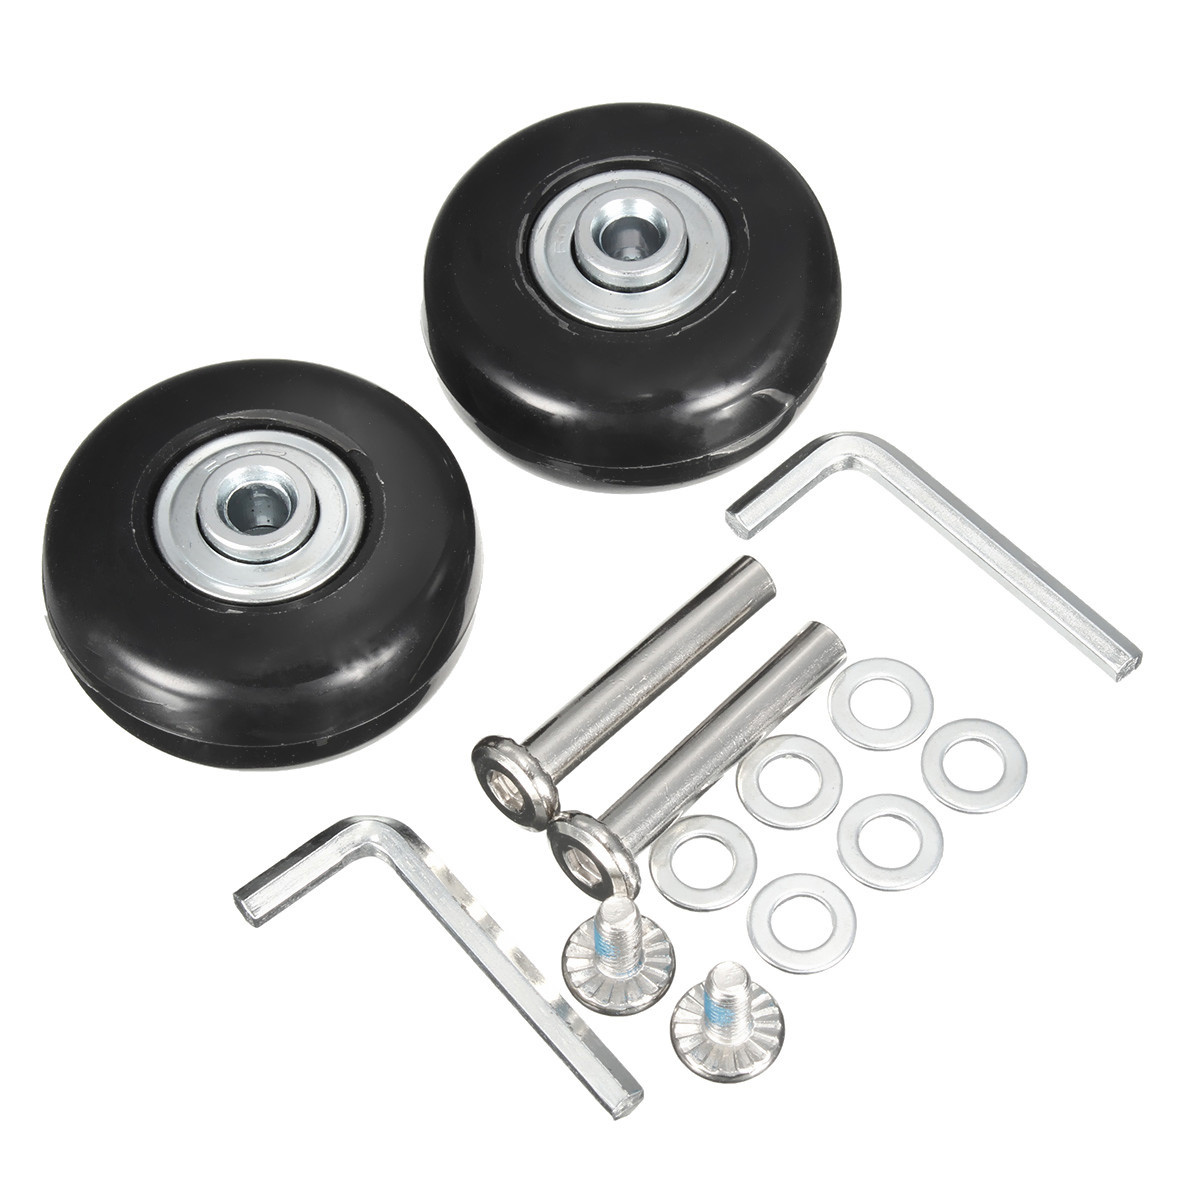 2-Sets-Luggage-Suitcase-Replacement-Wheels-OD-43-ID-6-W-18-Axles-30-Repair-Tools-1005576-1